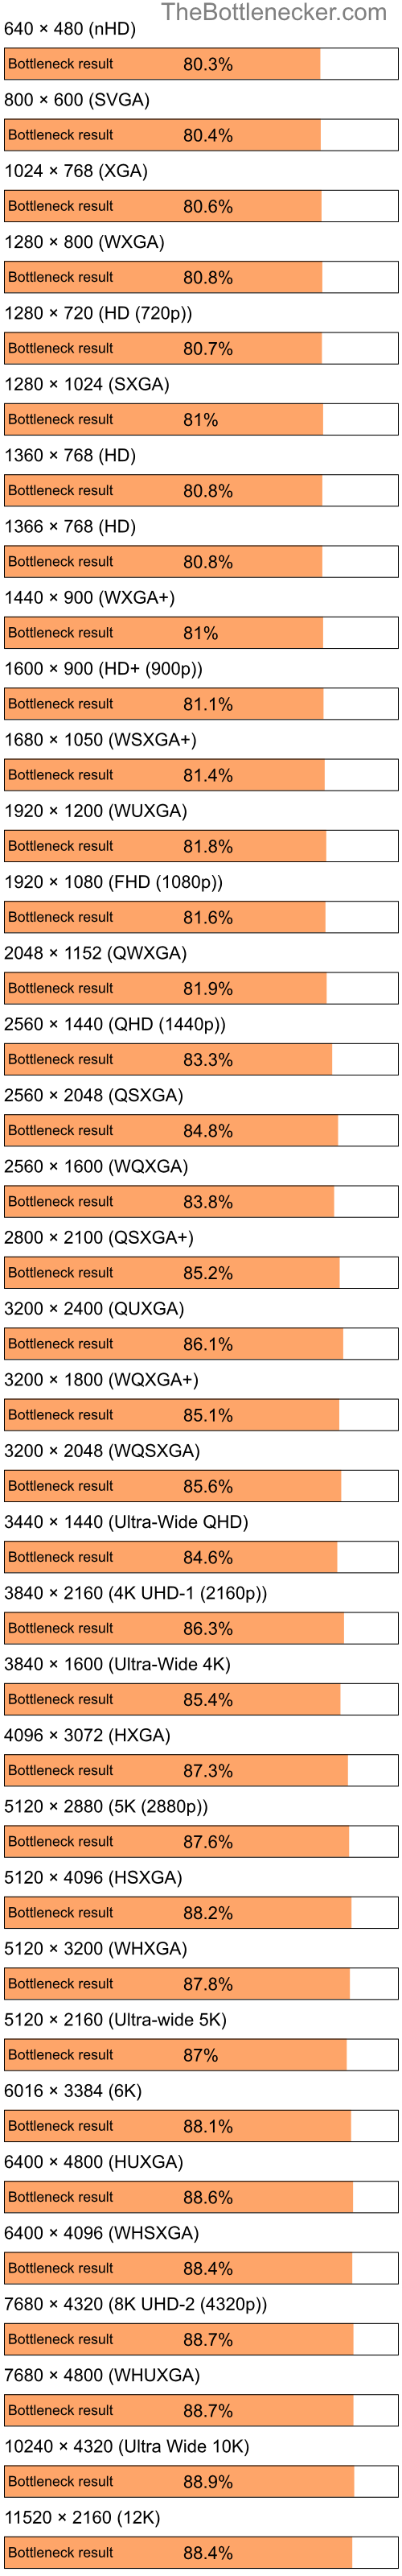 Bottleneck results by resolution for Intel Pentium 4 and AMD Radeon X1050 in Graphic Card Intense Tasks